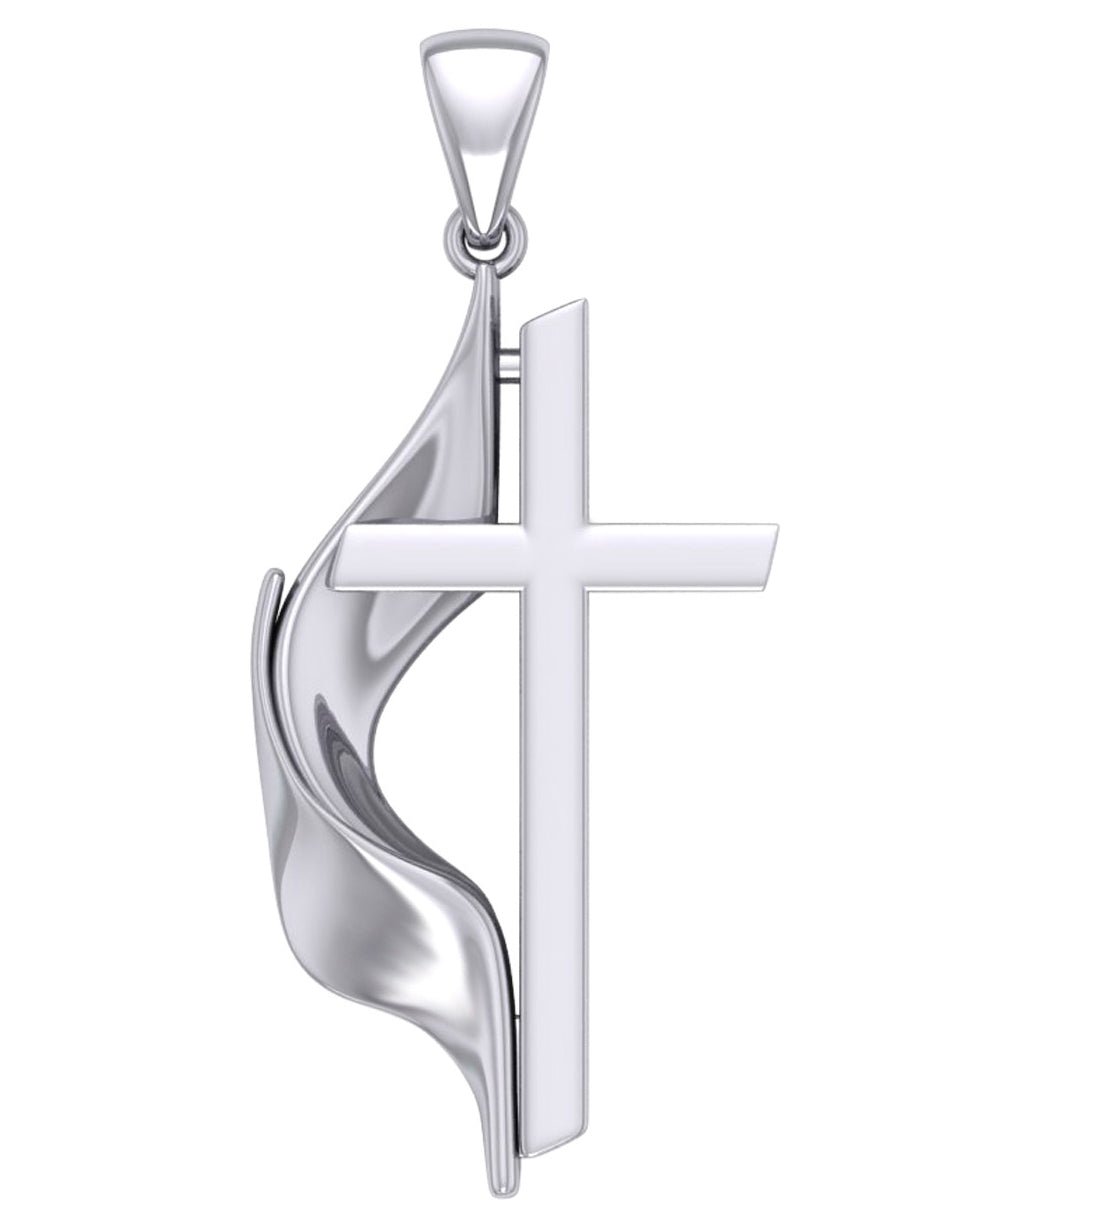 US Jewels Men's 925 Sterling Silver Large Methodist Cross Flame Pendant Necklace, 43mm - US Jewels